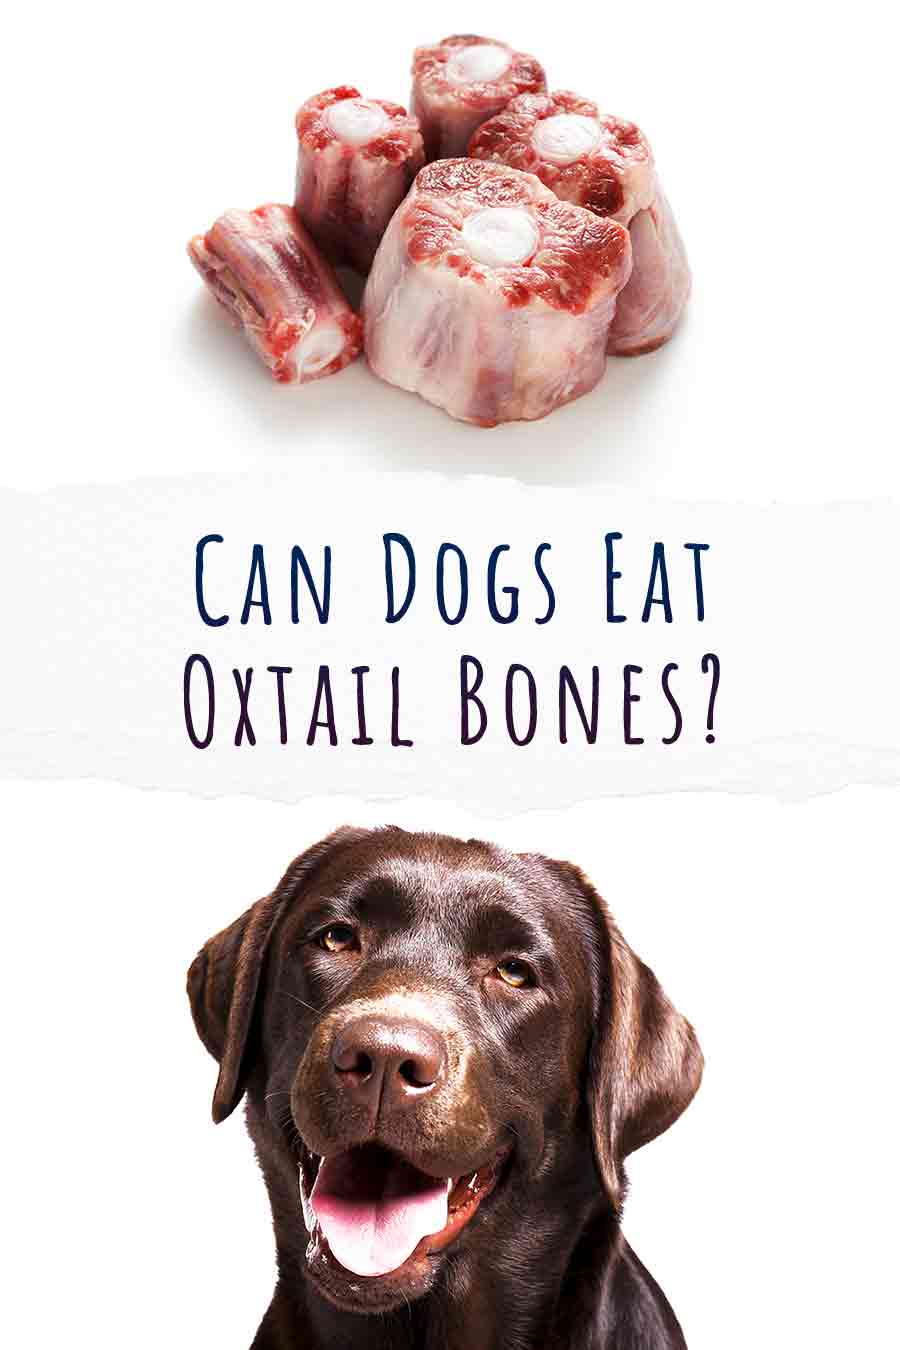 Can Dogs Eat Oxtail Bones? A Guide To Oxtail Bones For Dogs